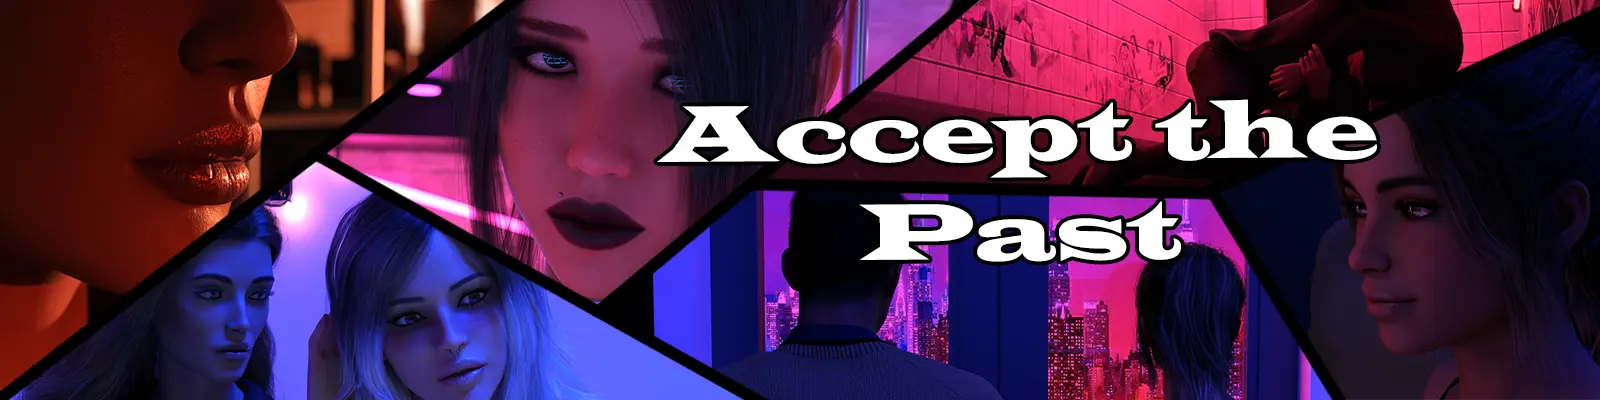 Accept the Past Remastered main image